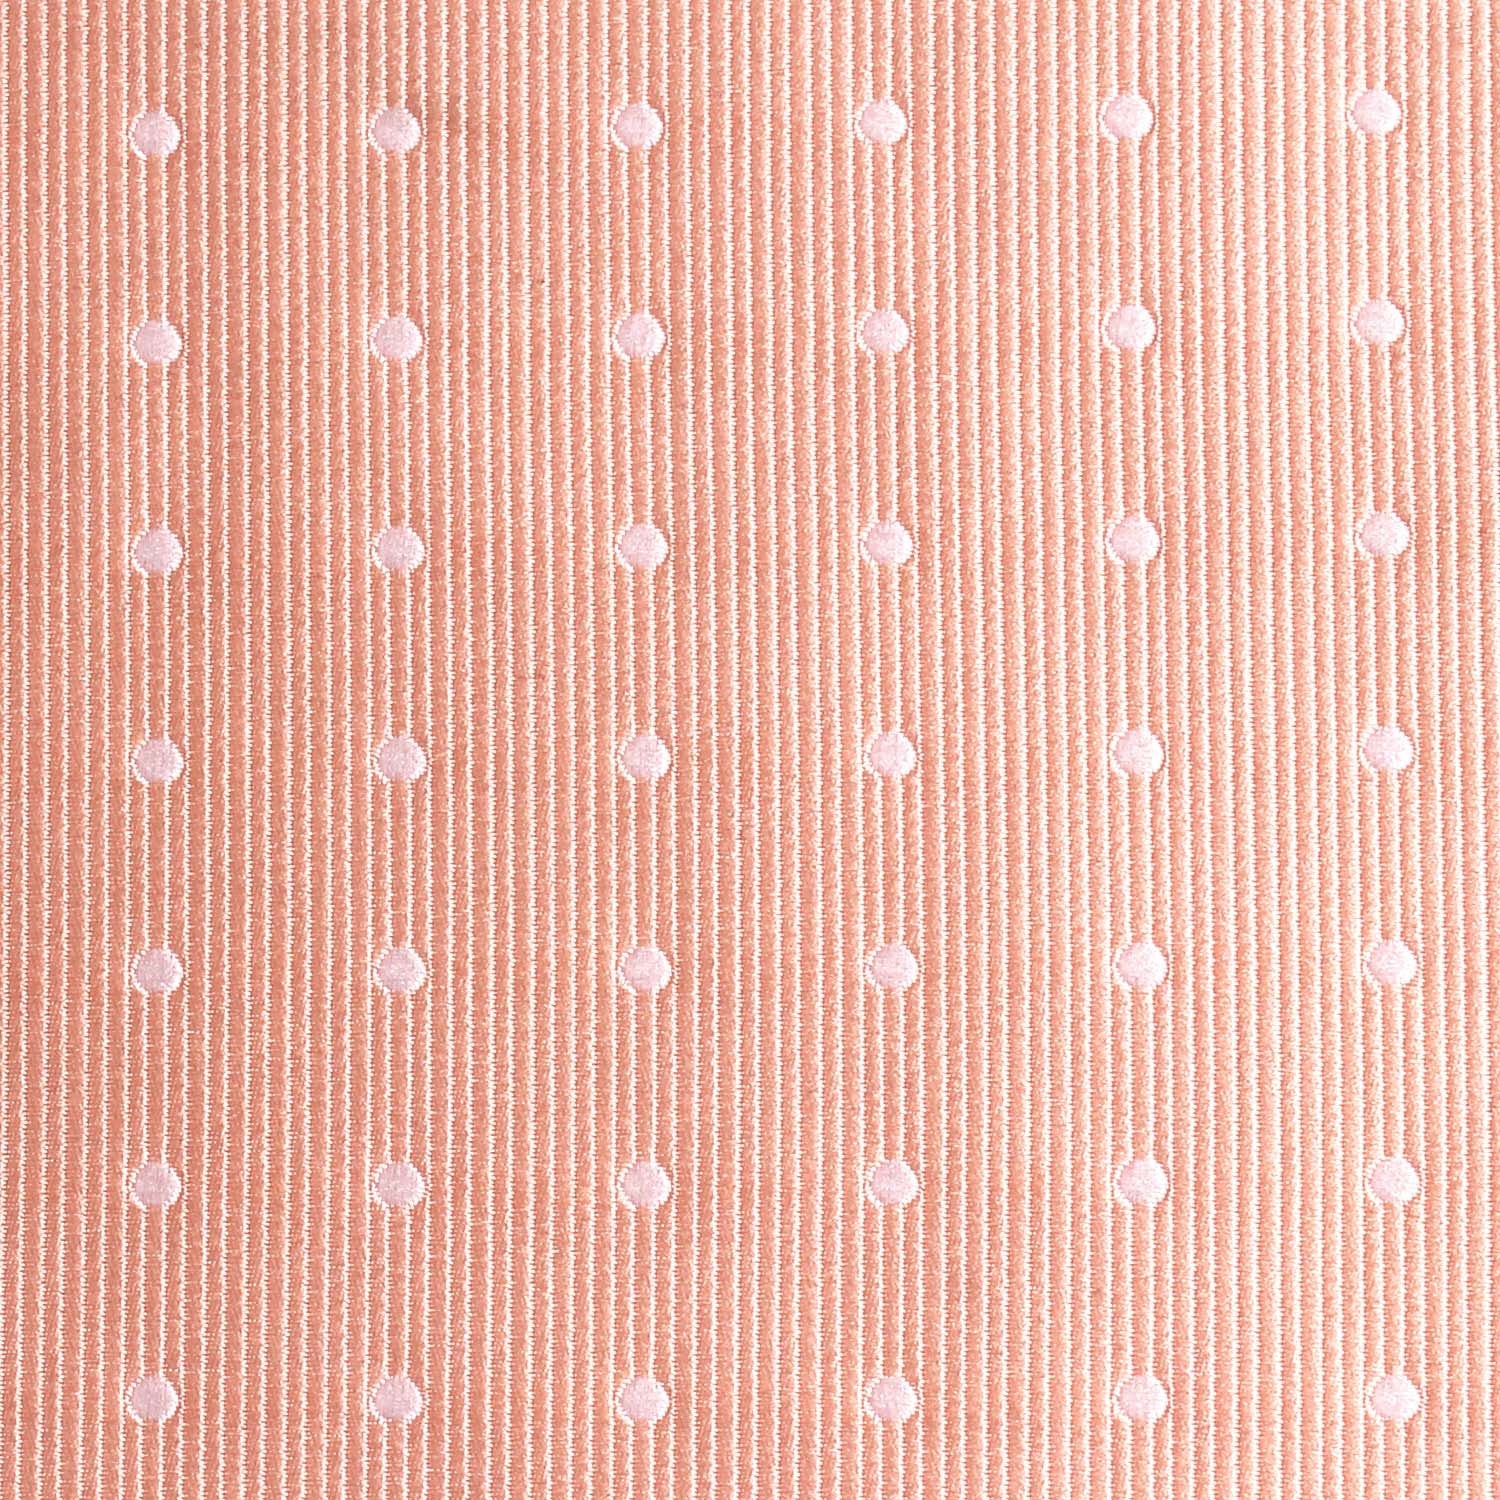 Peach with White Polka Dots Fabric Self Tie Bow Tie M134